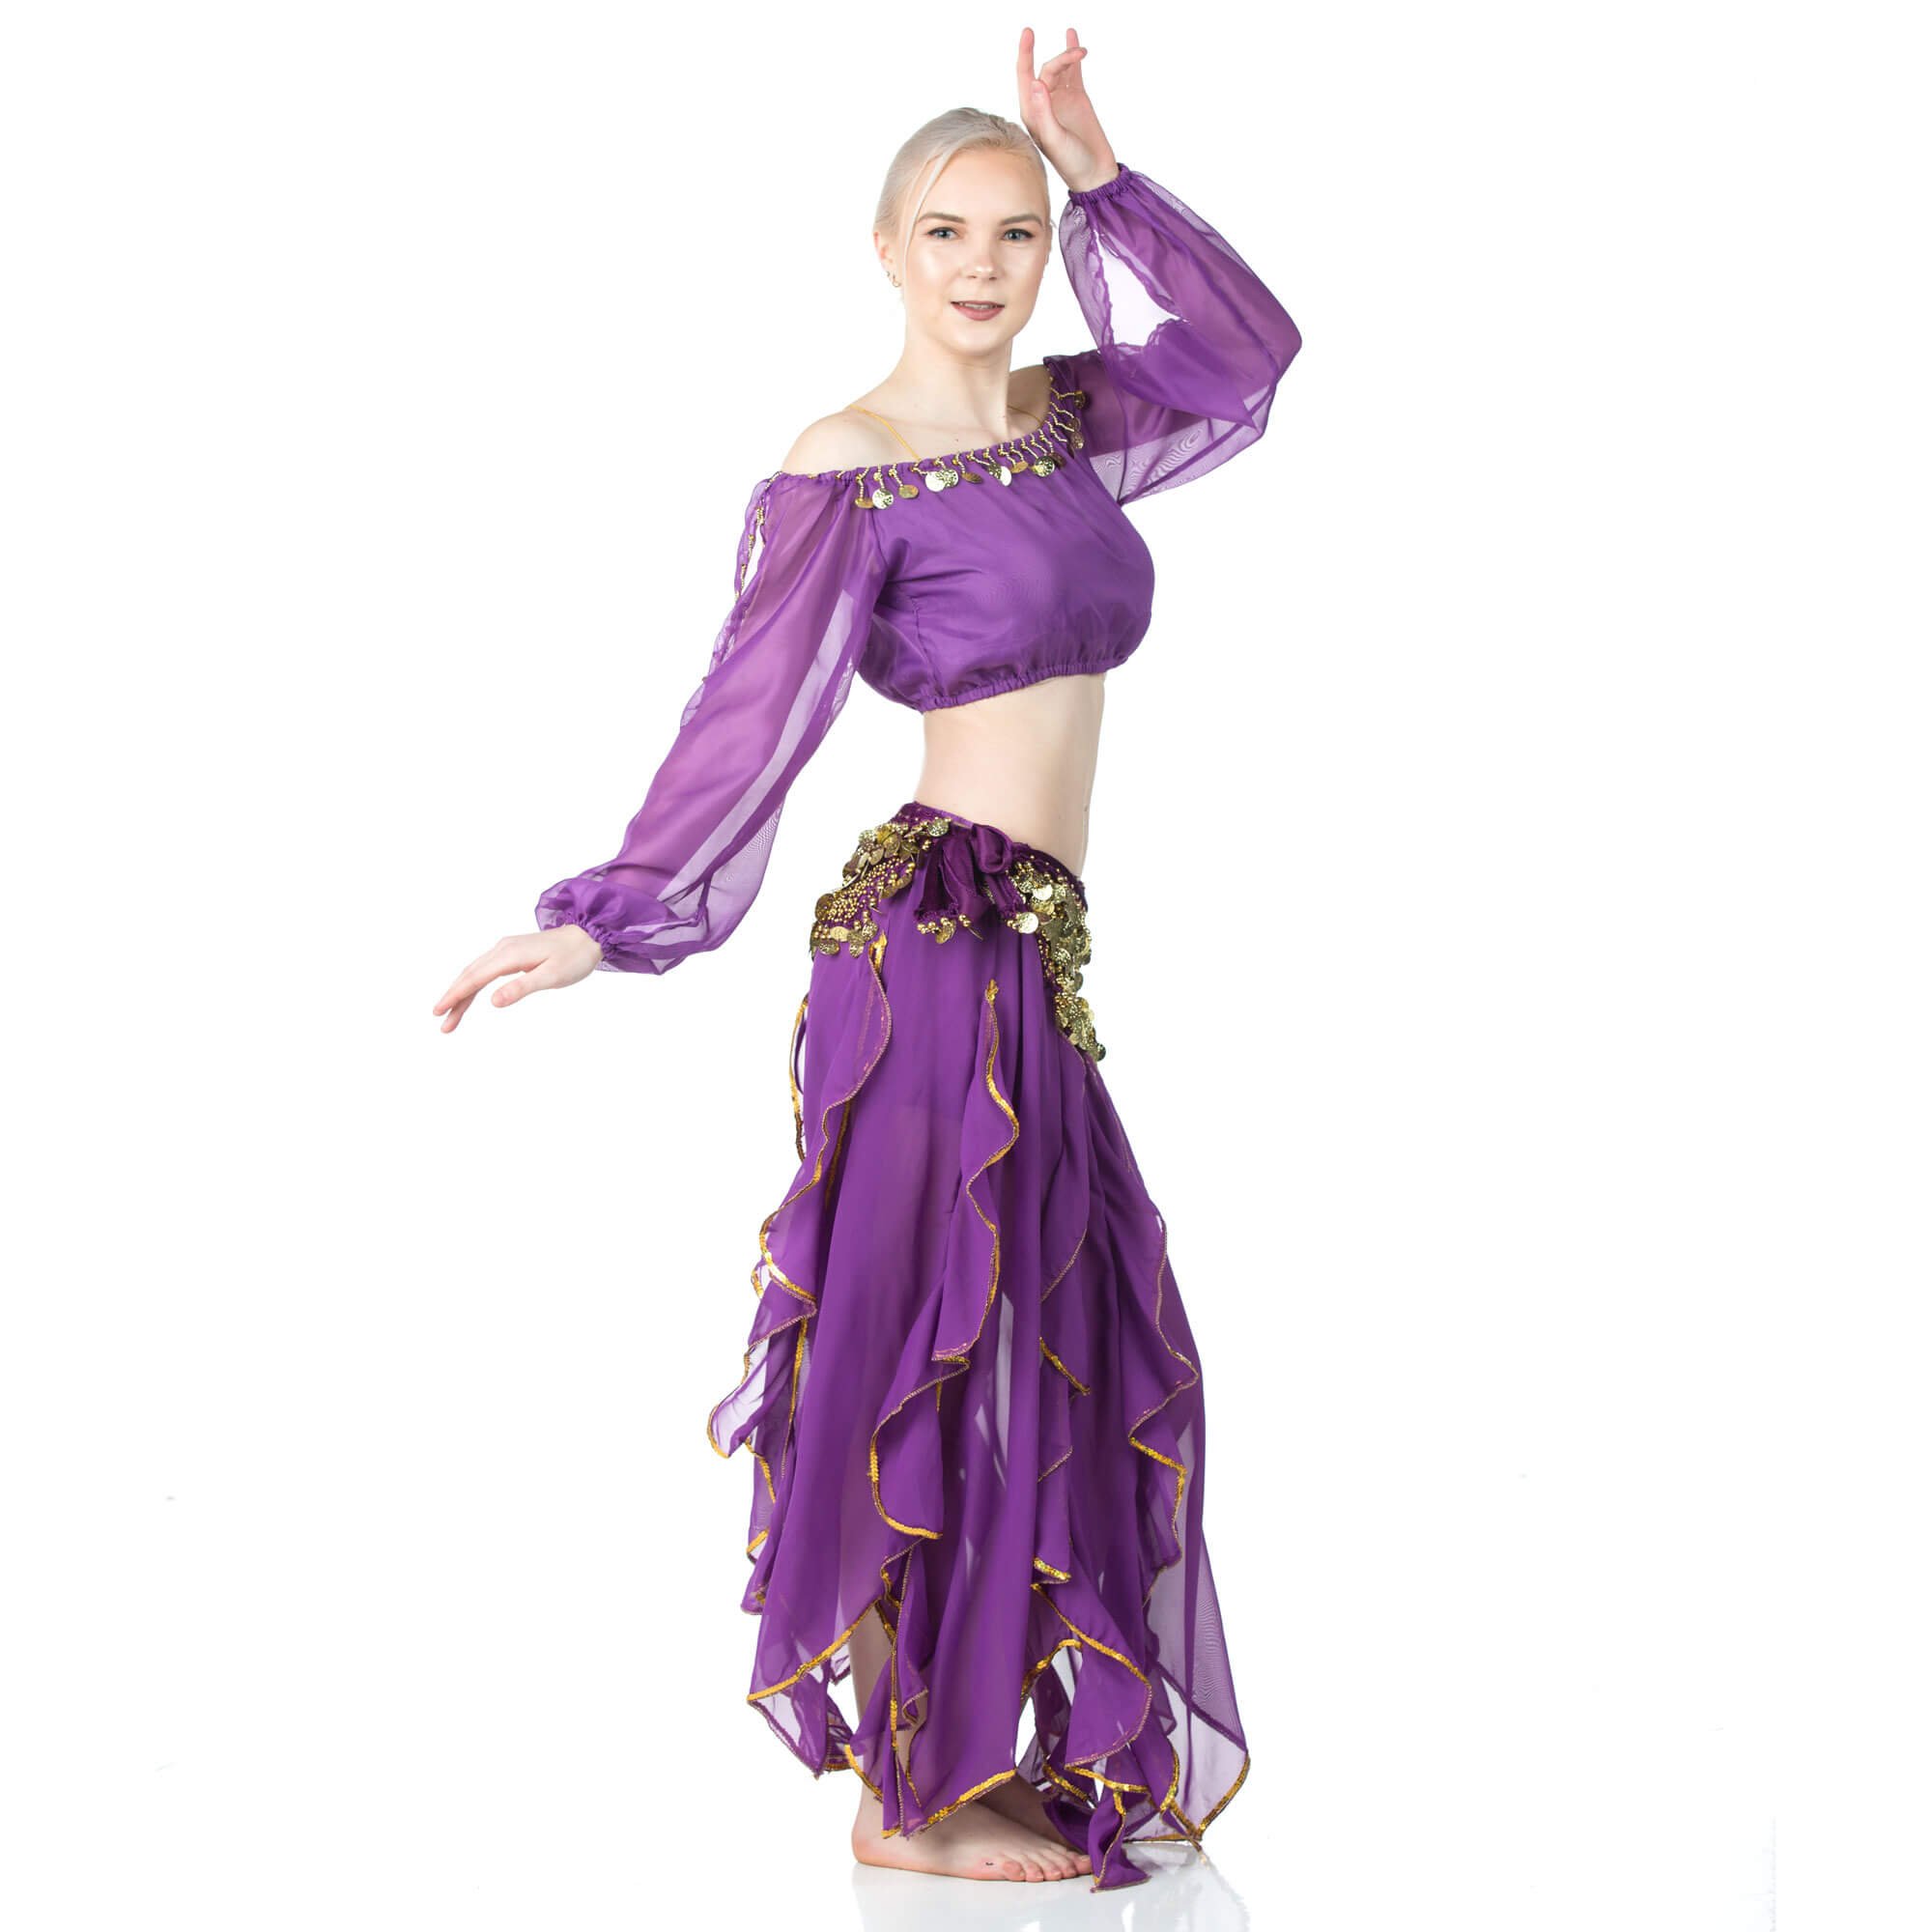 Danzcue Belly Dance Chiffon Long Puff Sleeves Top - Click Image to Close